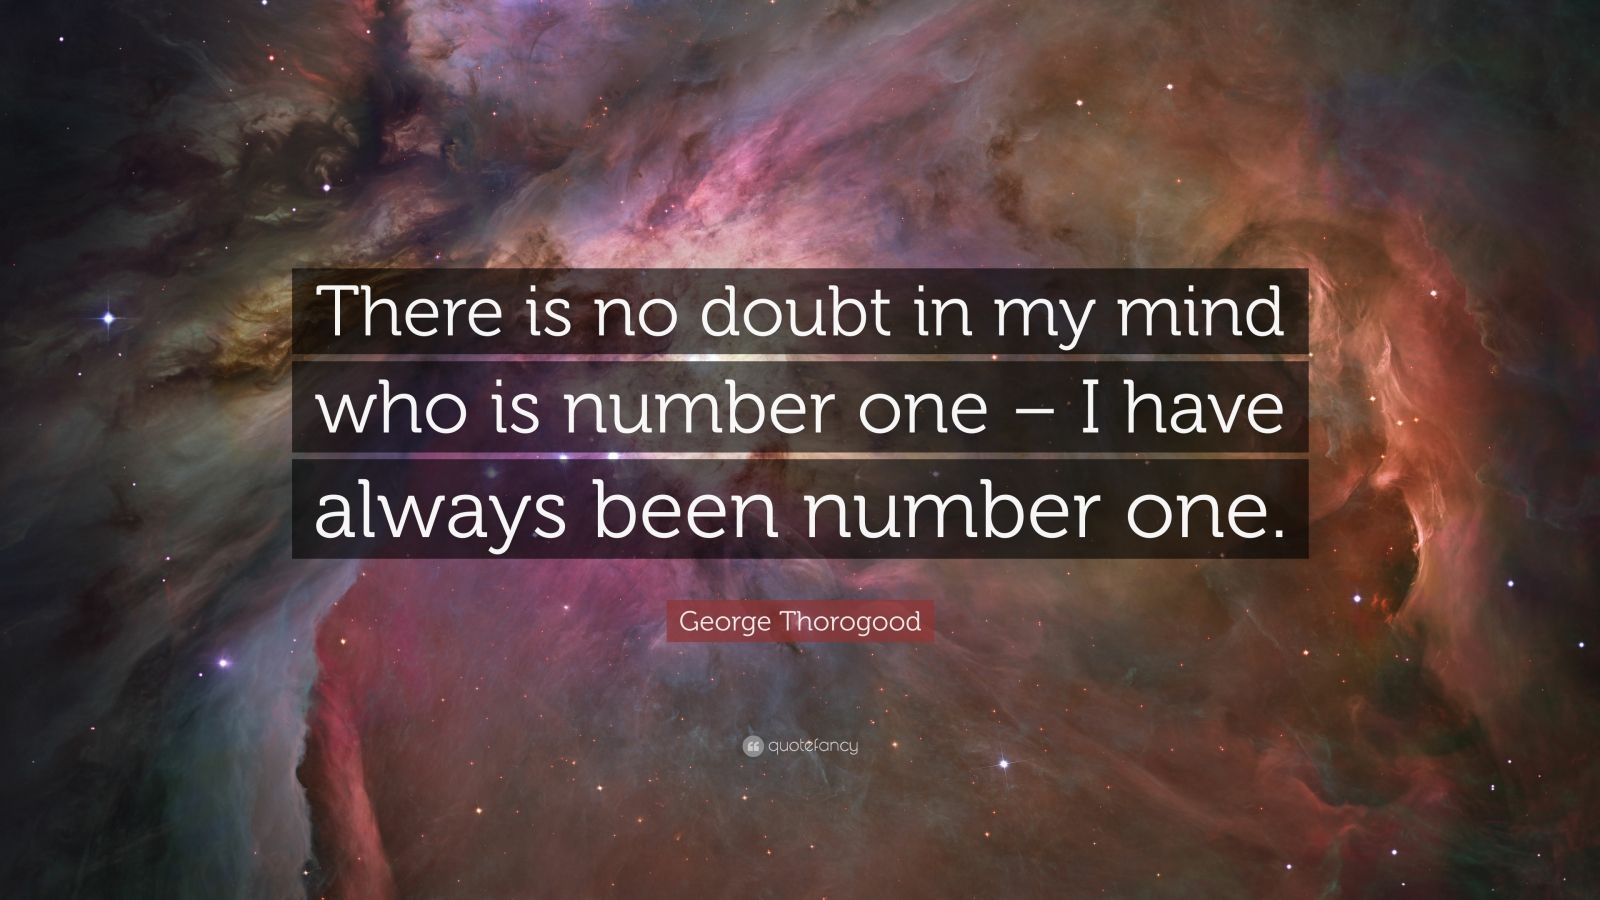 George Thorogood Quote: “There is no doubt in my mind who is number one – I have always been ...